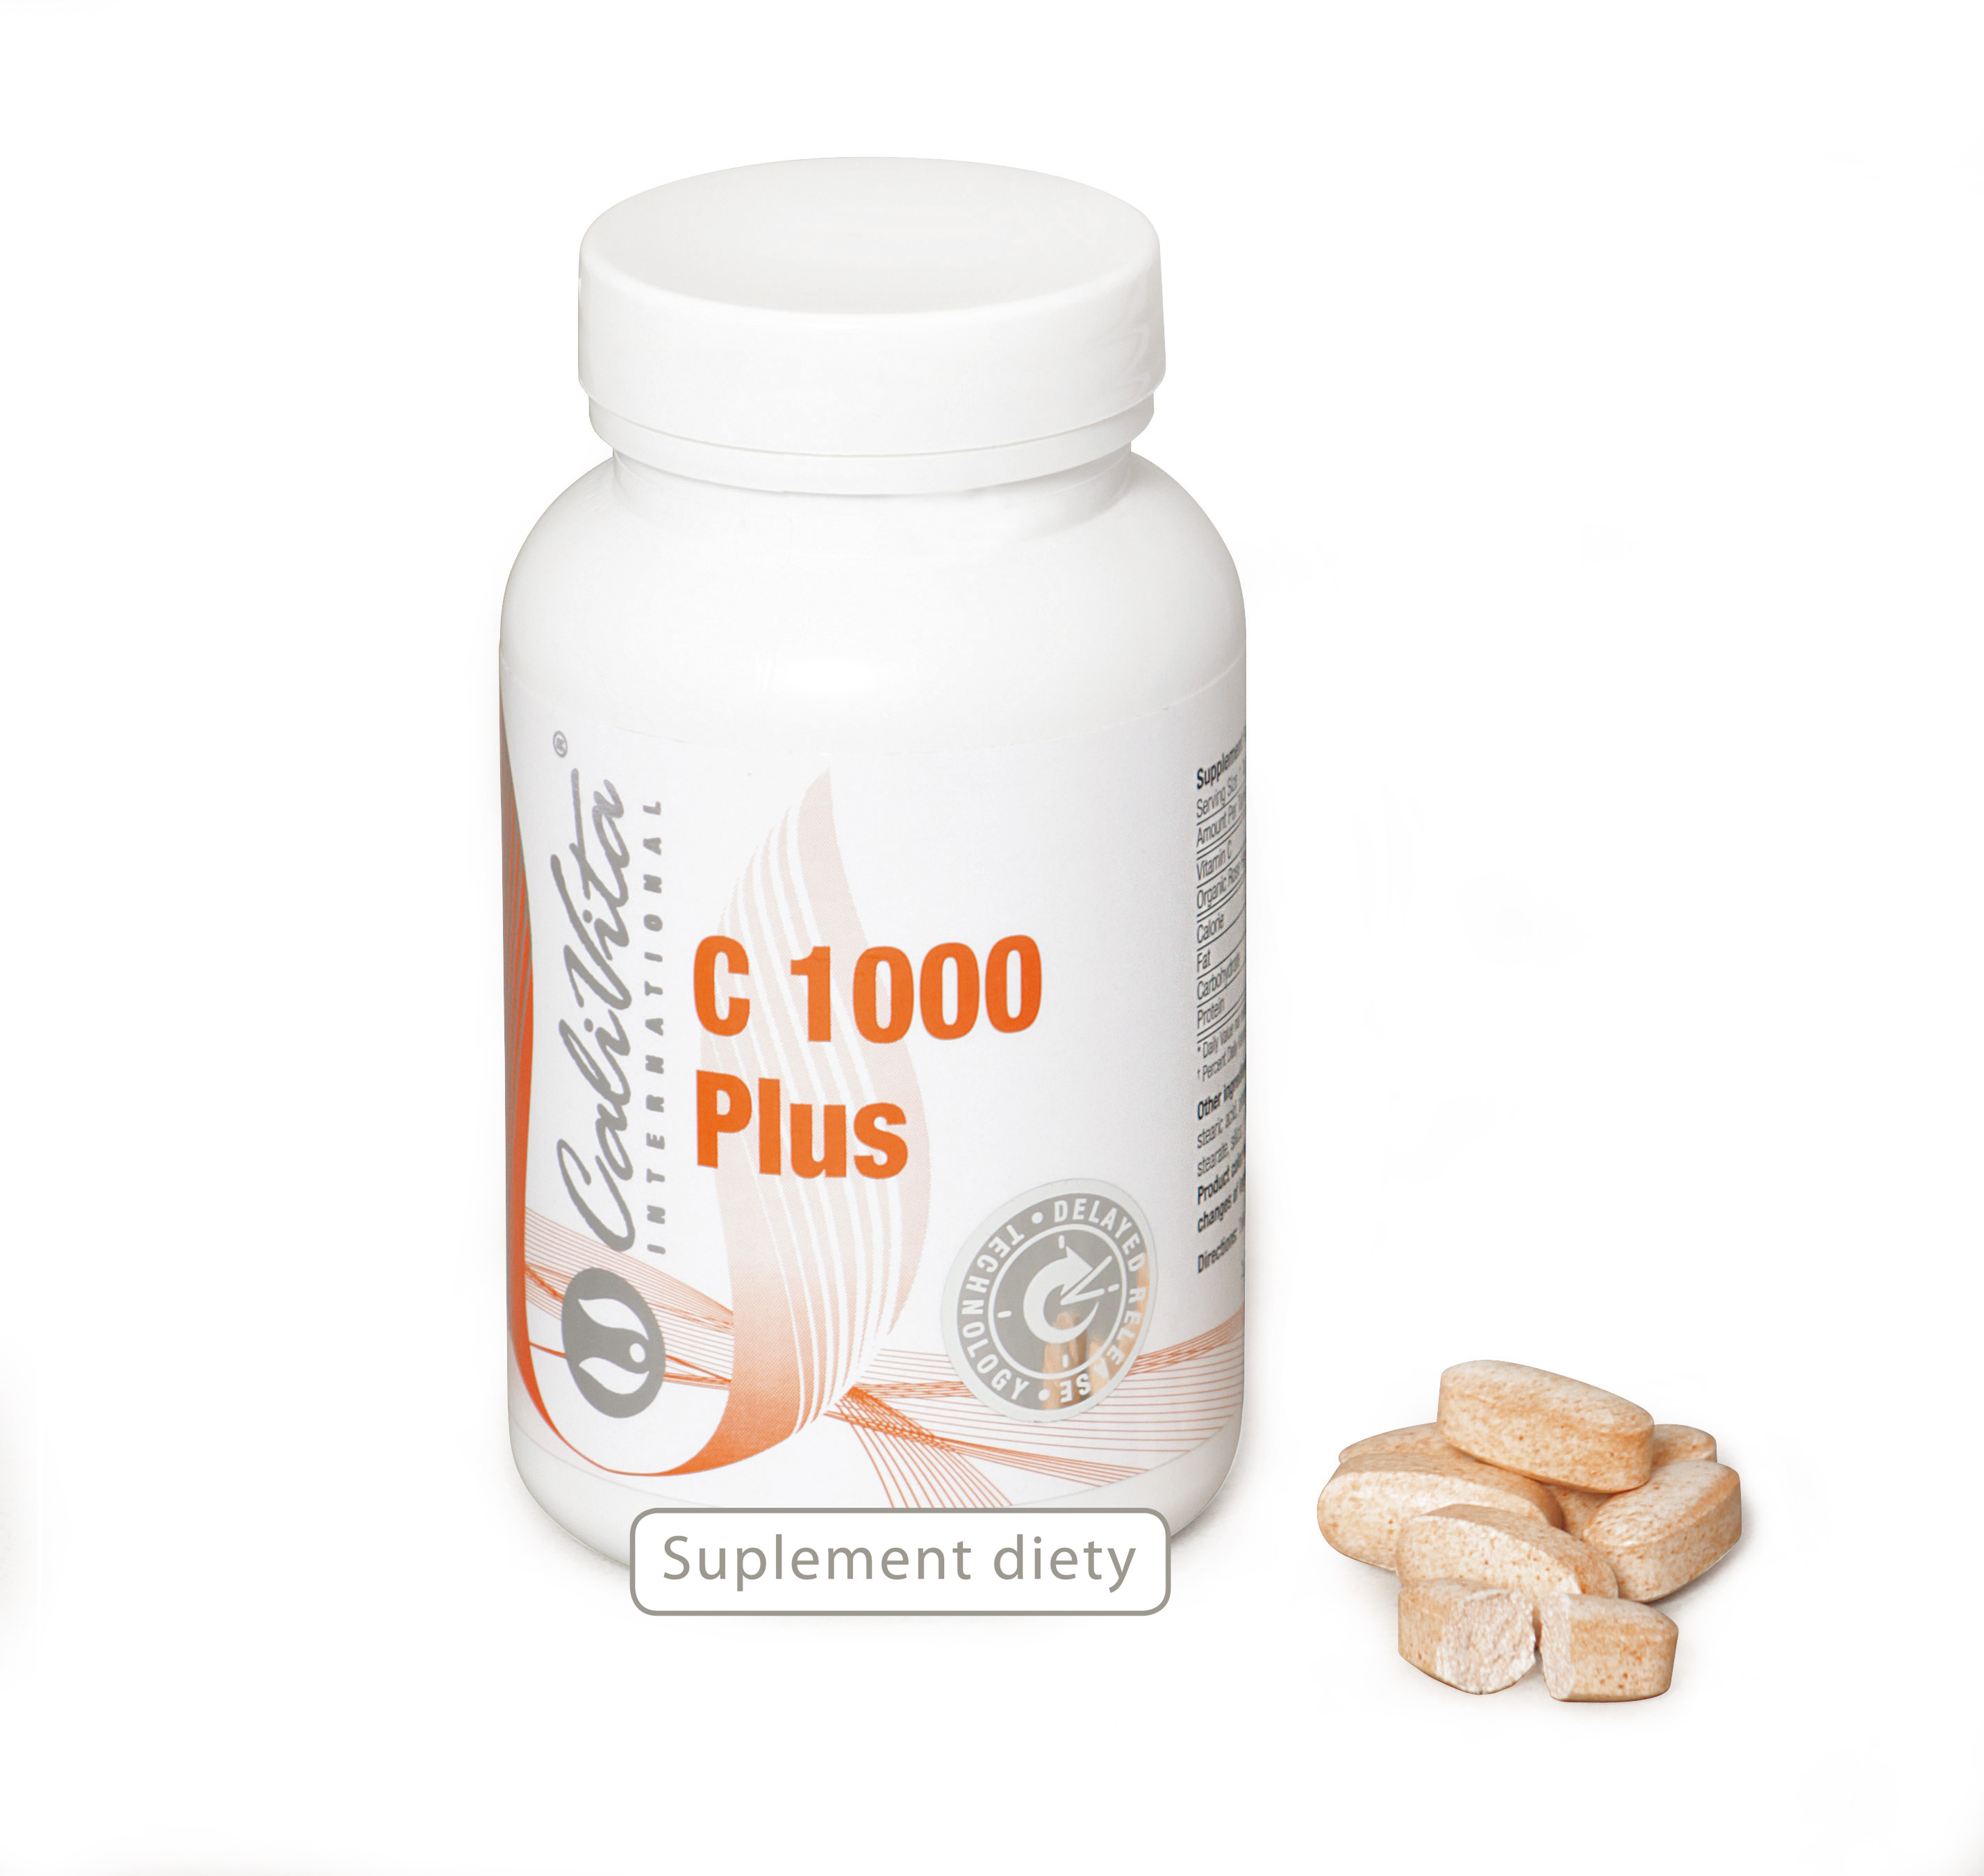 C 1000 - check our special offer for C 1000 Plus Pharmacy Poznan -